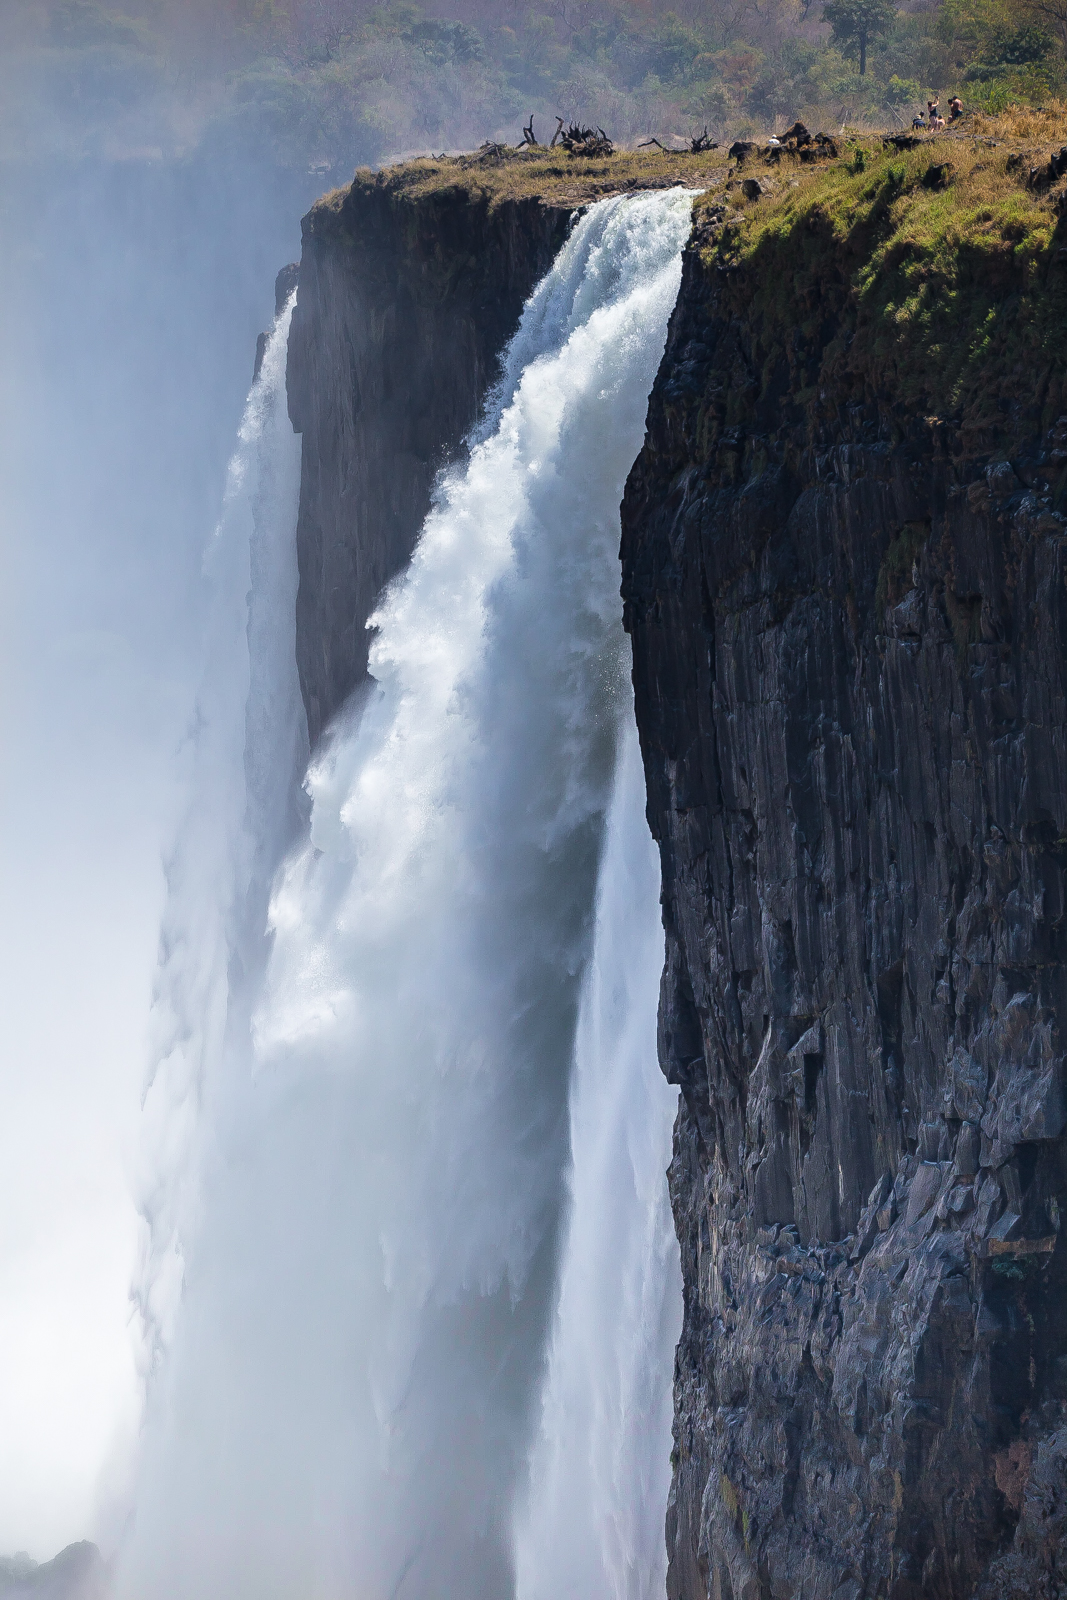 People standing at Devil's pool, right above the fall, Victoria Falls, Zimbabwe.